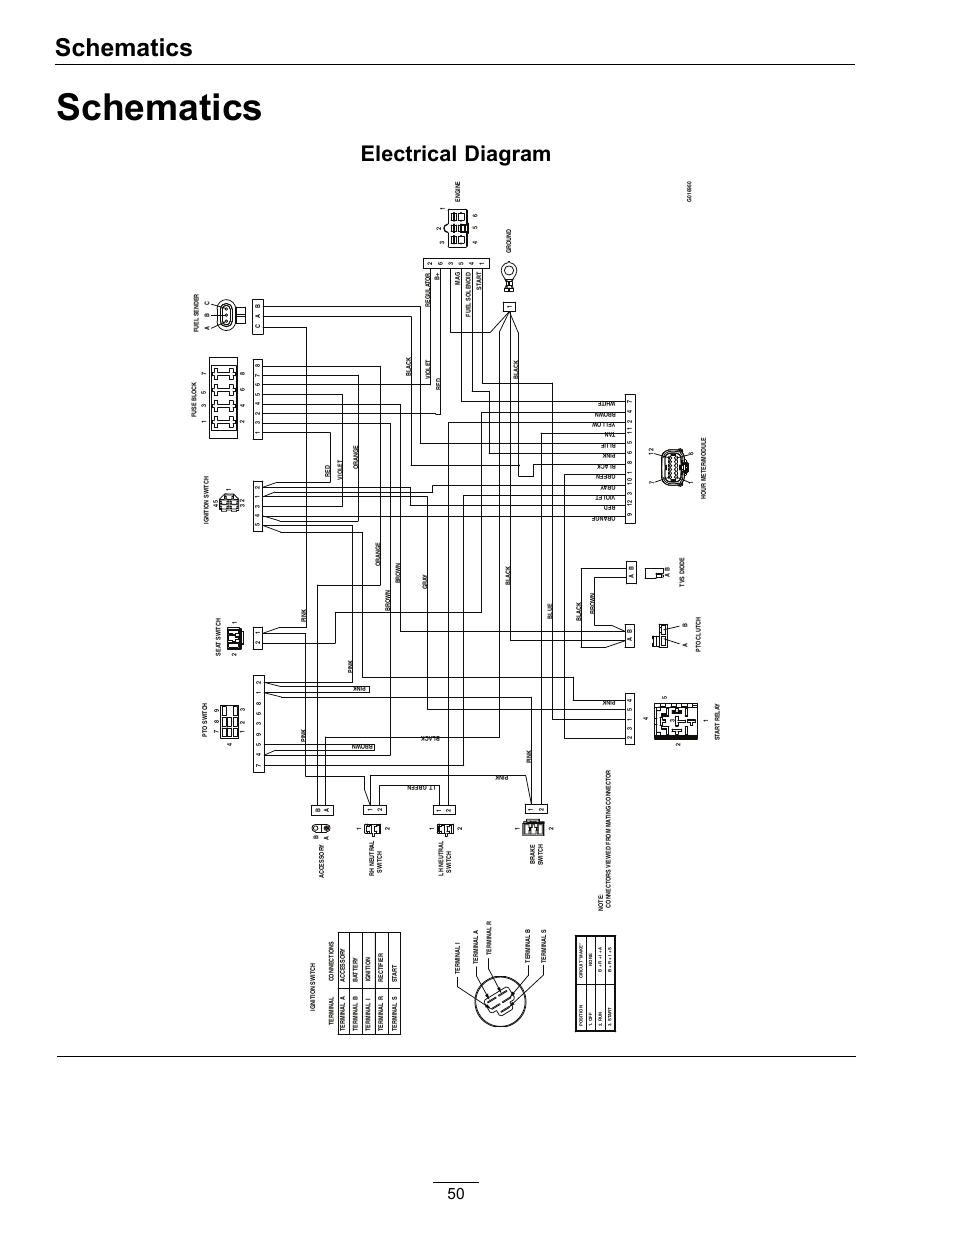 air vent thermostat part 58033 wiring diagram